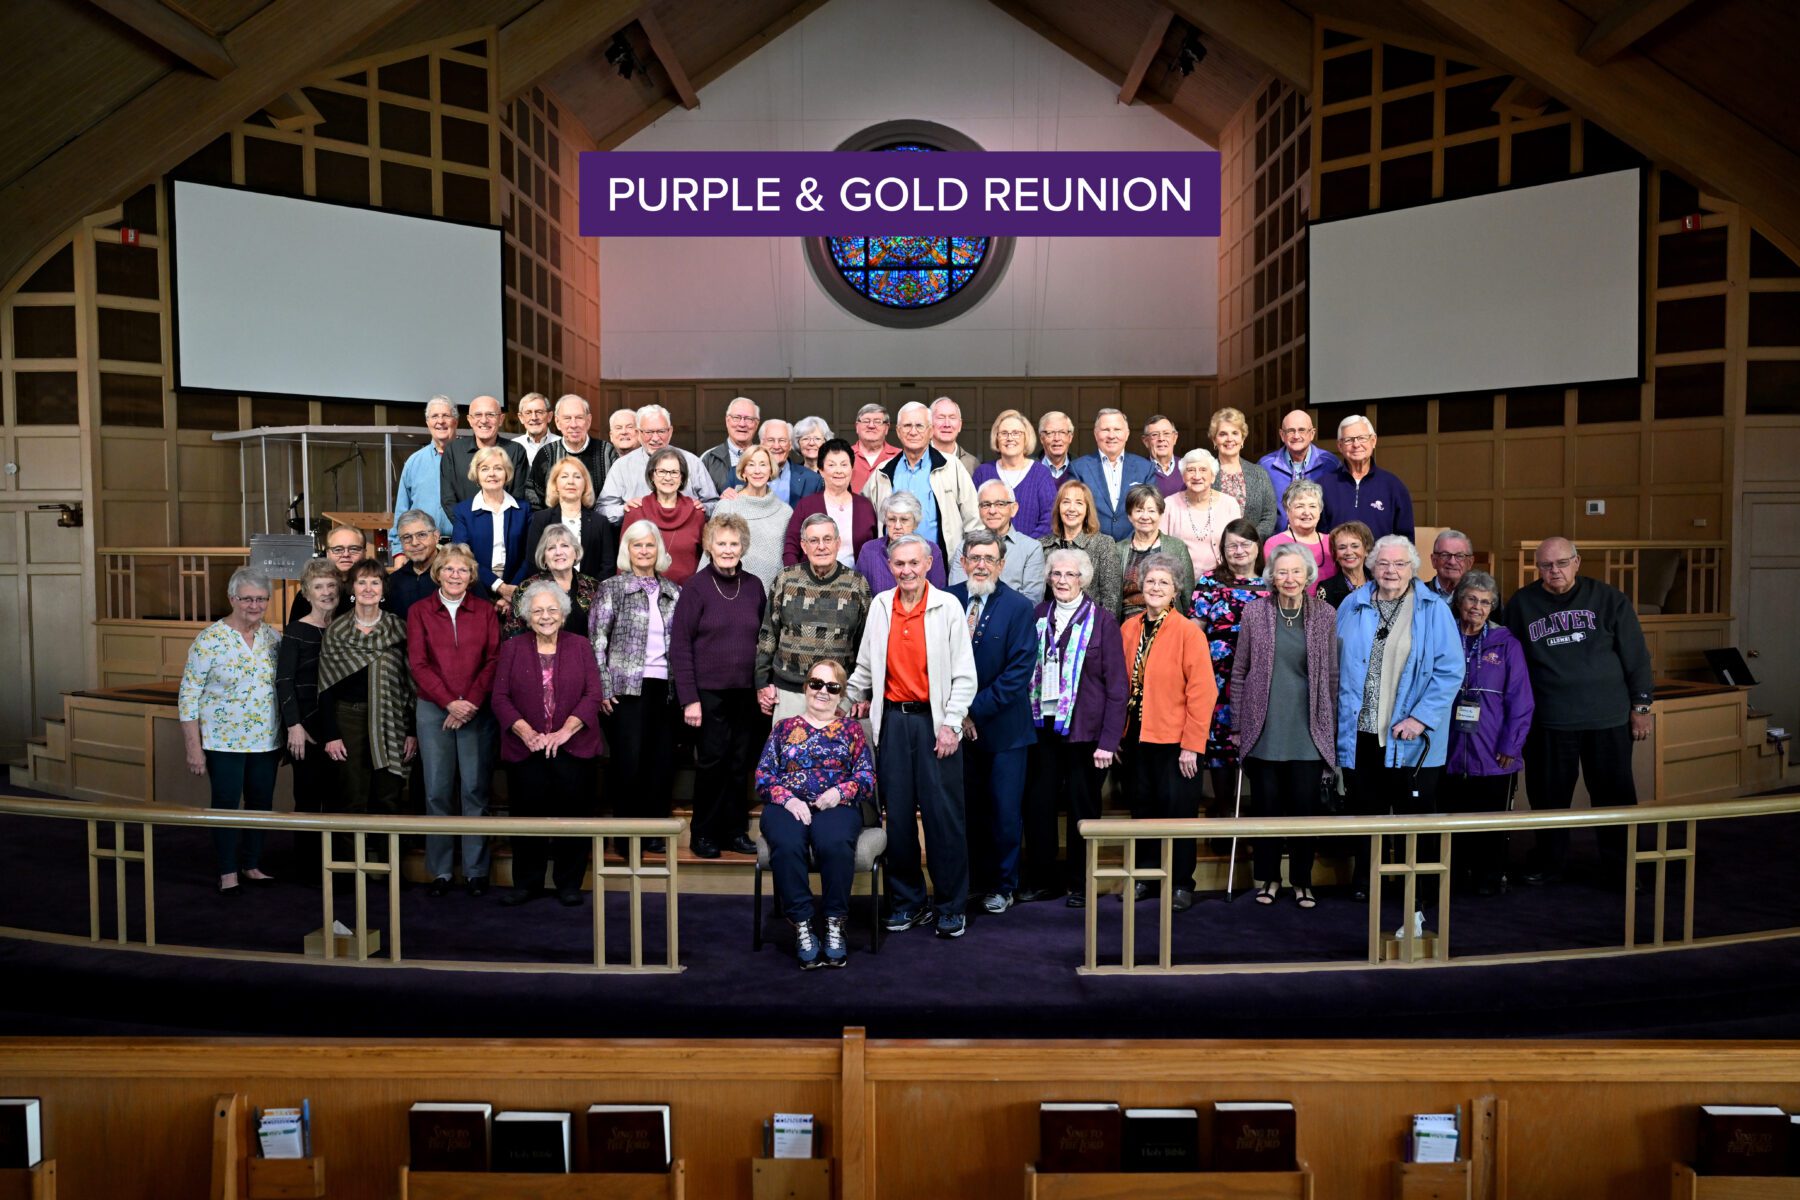 A class picture of the Purple and Gold reunion: a group of those who graduated 50 plus years ago!